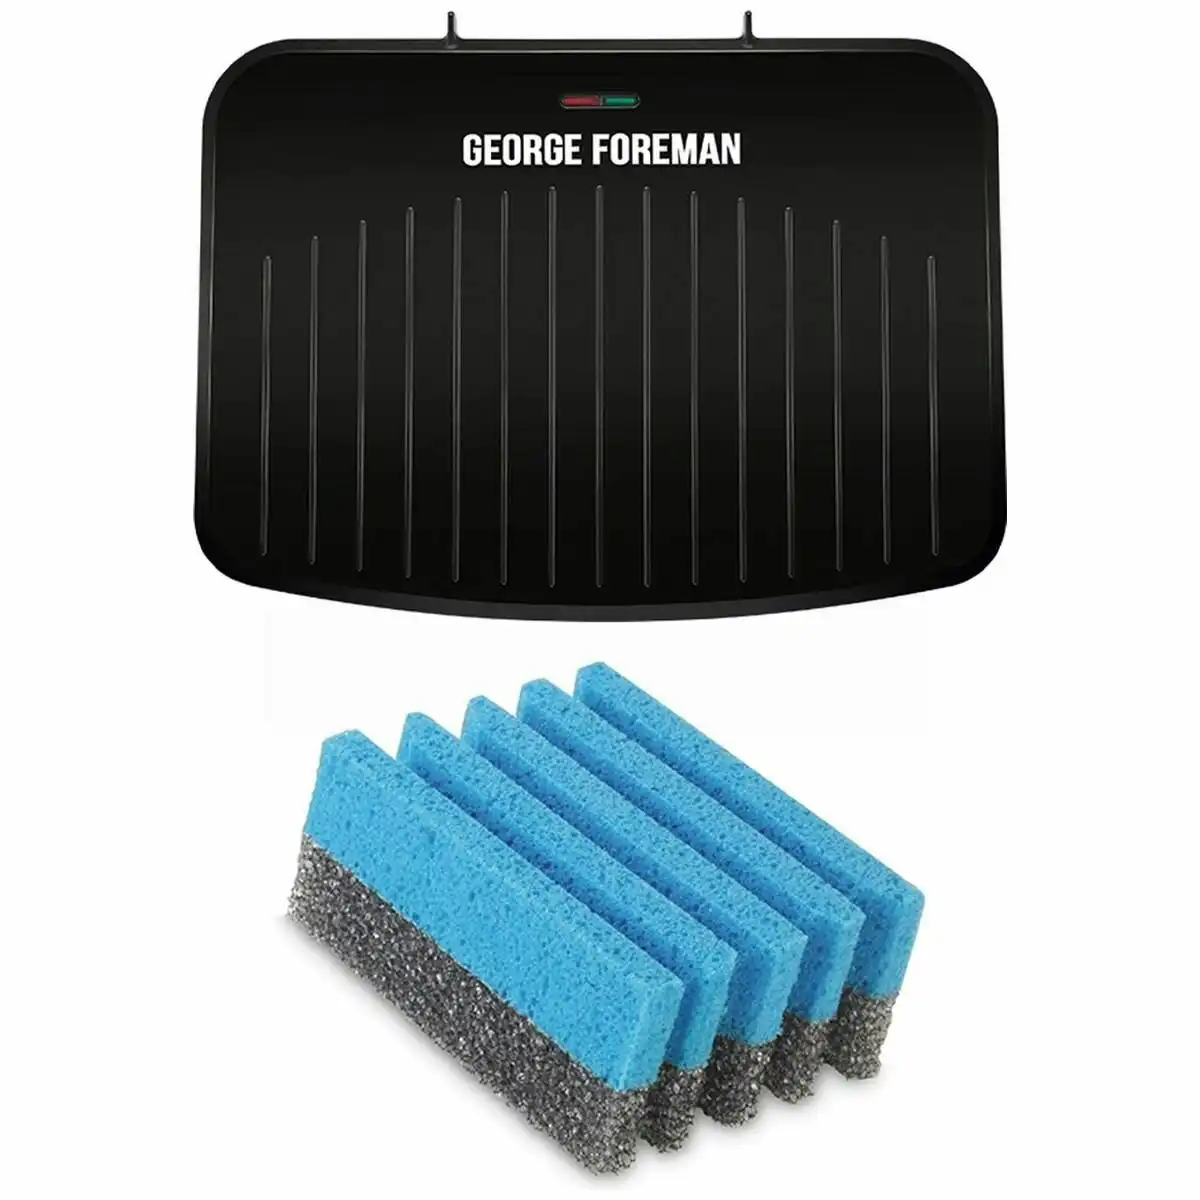 George Foreman Large Fit Grill with Grill Sponge